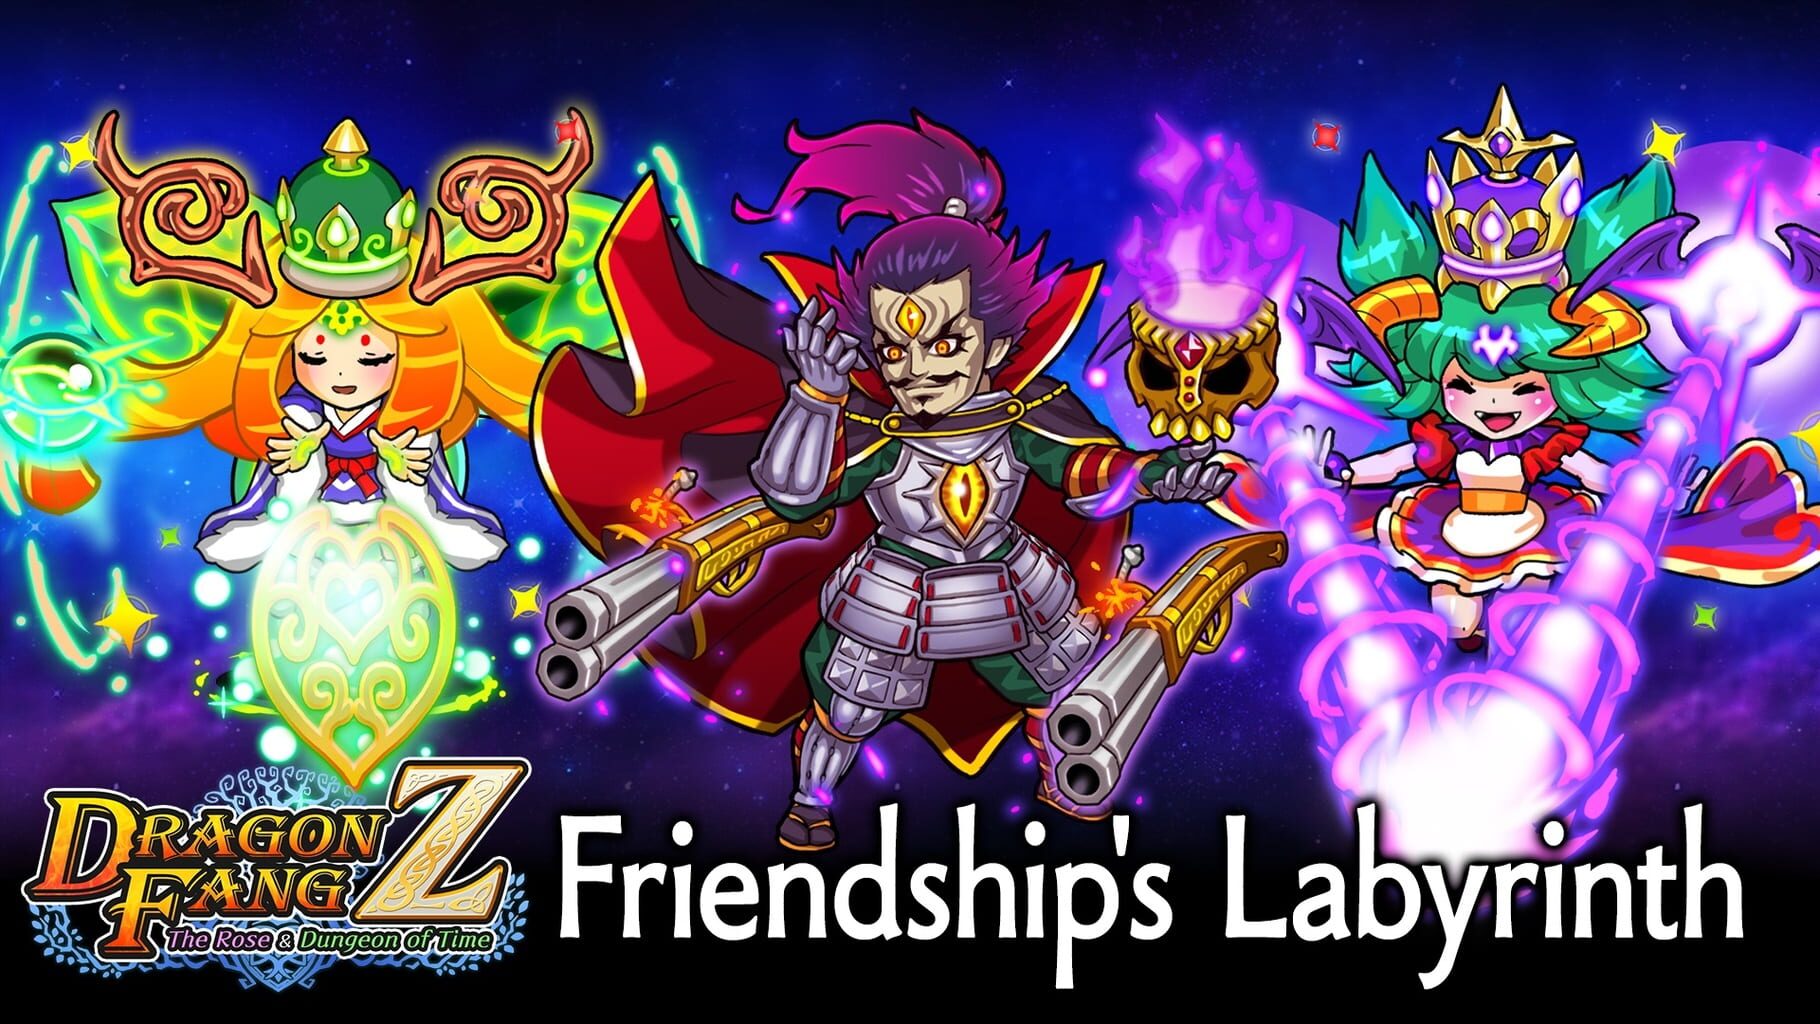 Dragon Fang Z: The Rose & Dungeon of Time - Extra Dungeon: Friendship's Labyrinth artwork